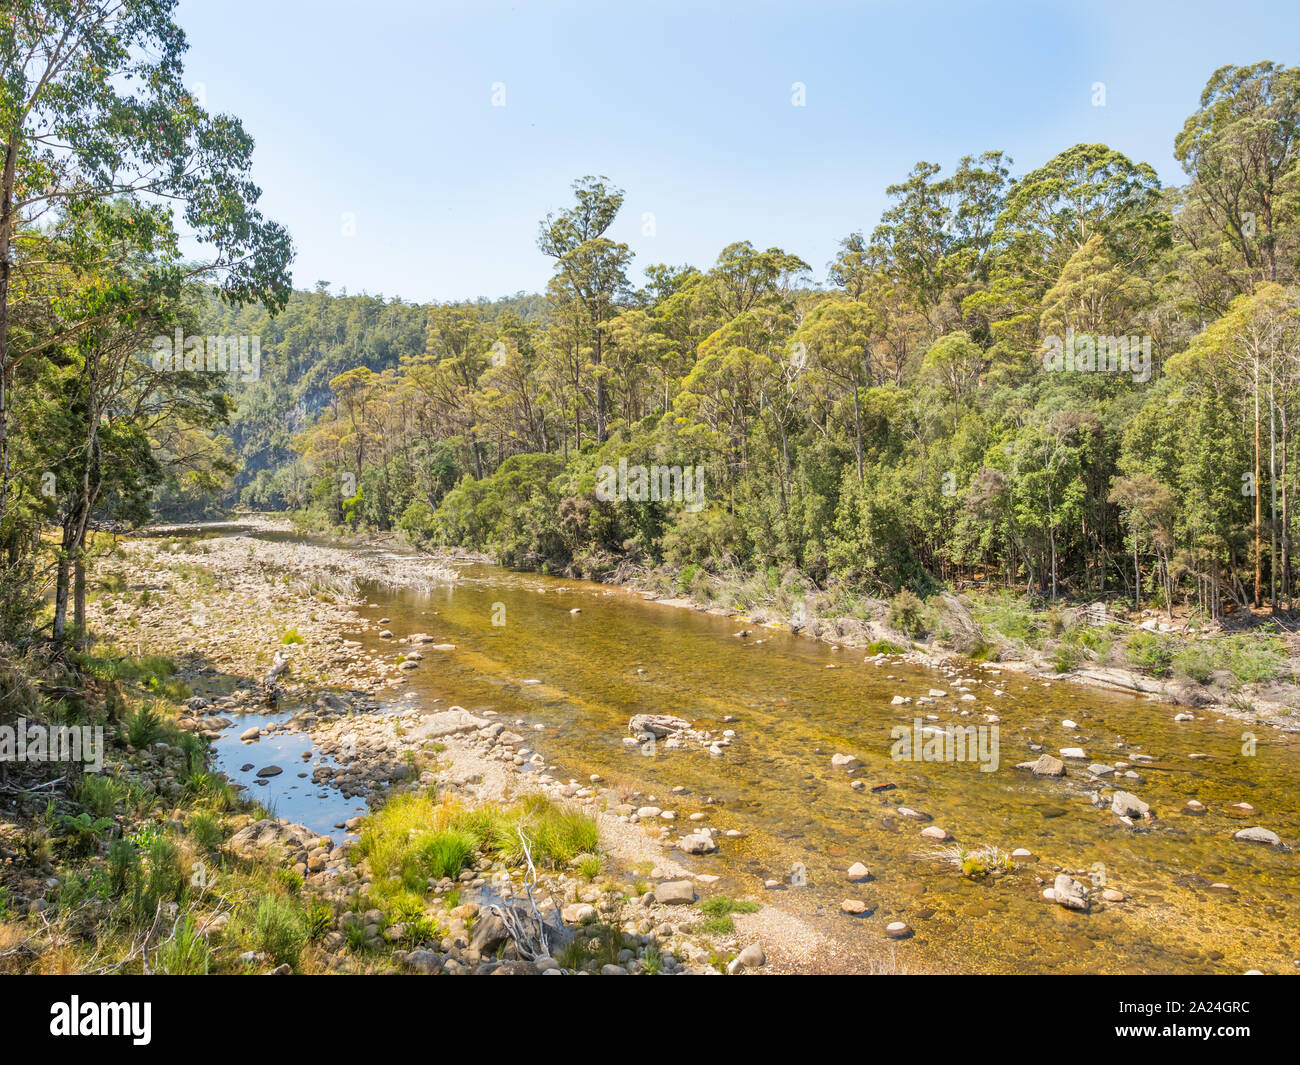 The Mersey River in northern Tasmania, Australia, rises in the lake district near Mount Pelion East on the Central Plateau. Stock Photo